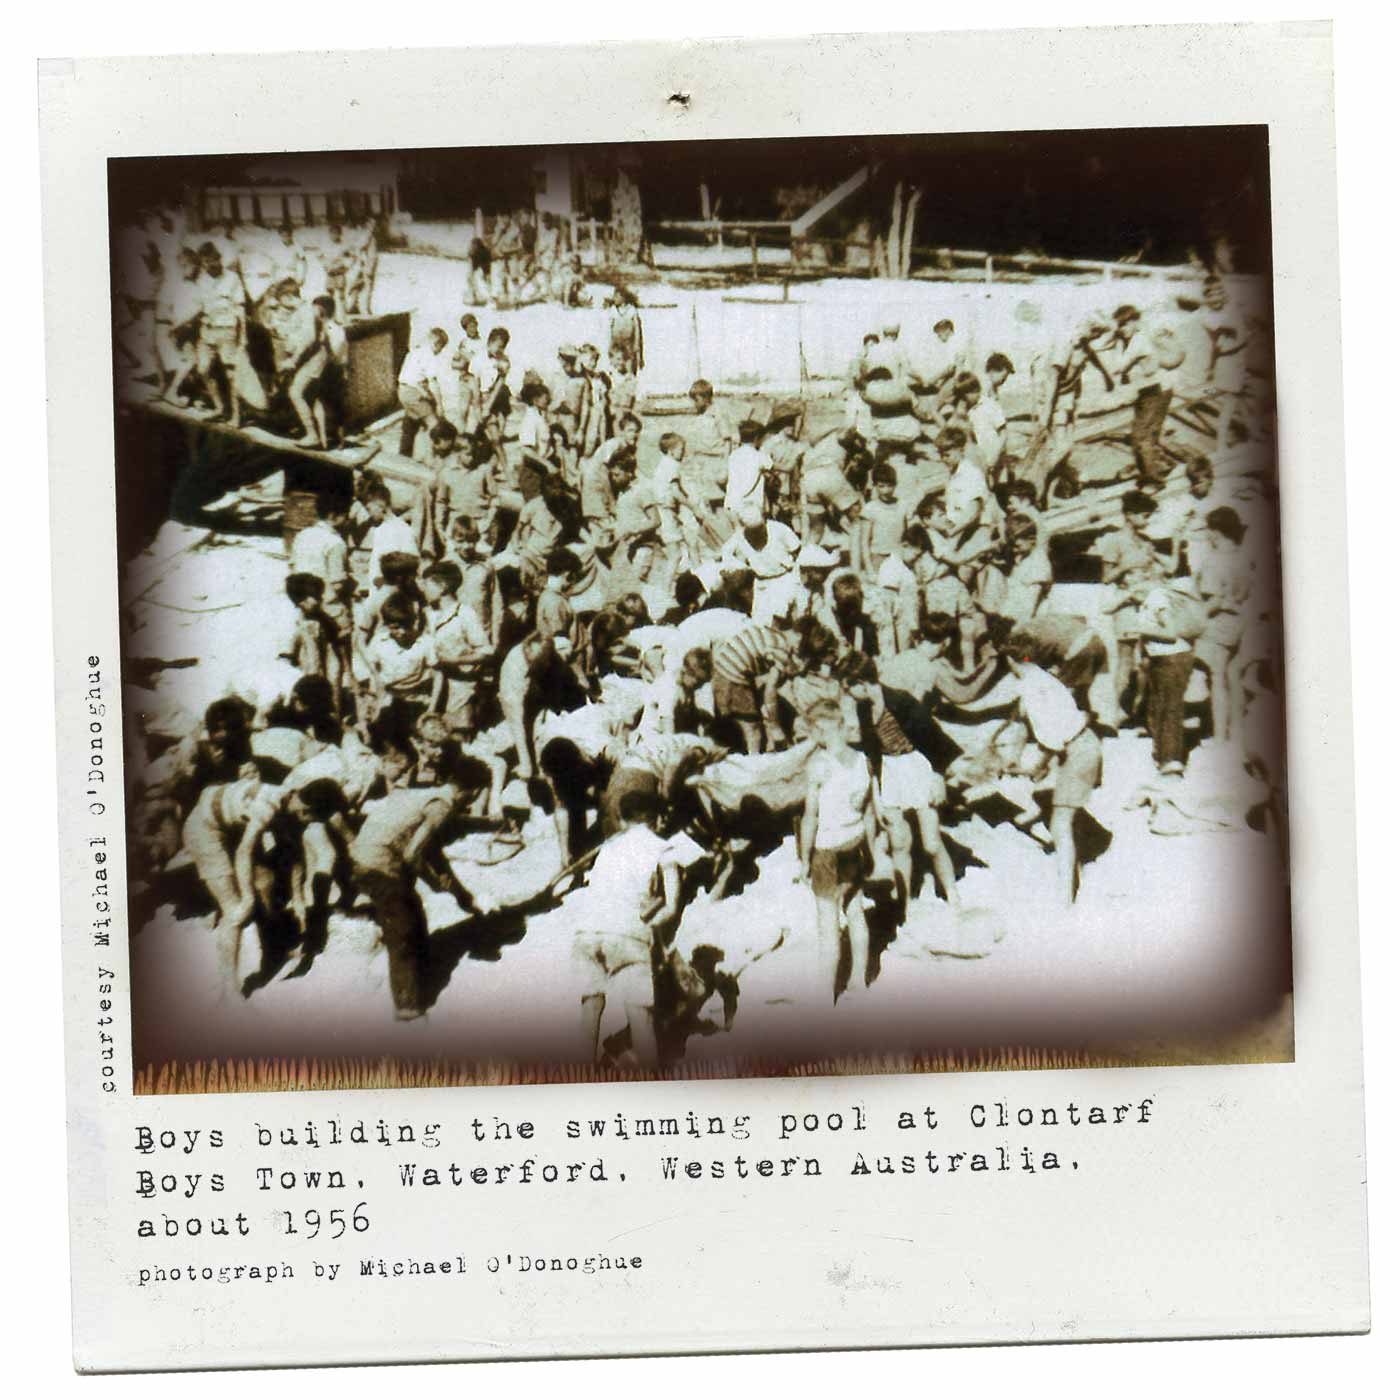 Polaroid photograph showing a large group of boys busy on a buliding site. Many dig in the foreground and others walk up a plank on the left. Typewritten text below reads 'Boys building the swimming pool at Clontarf Boys Town, Waterford, Western Australia, about 1956. Photograph by Michael O'Donoghue'. - click to view larger image